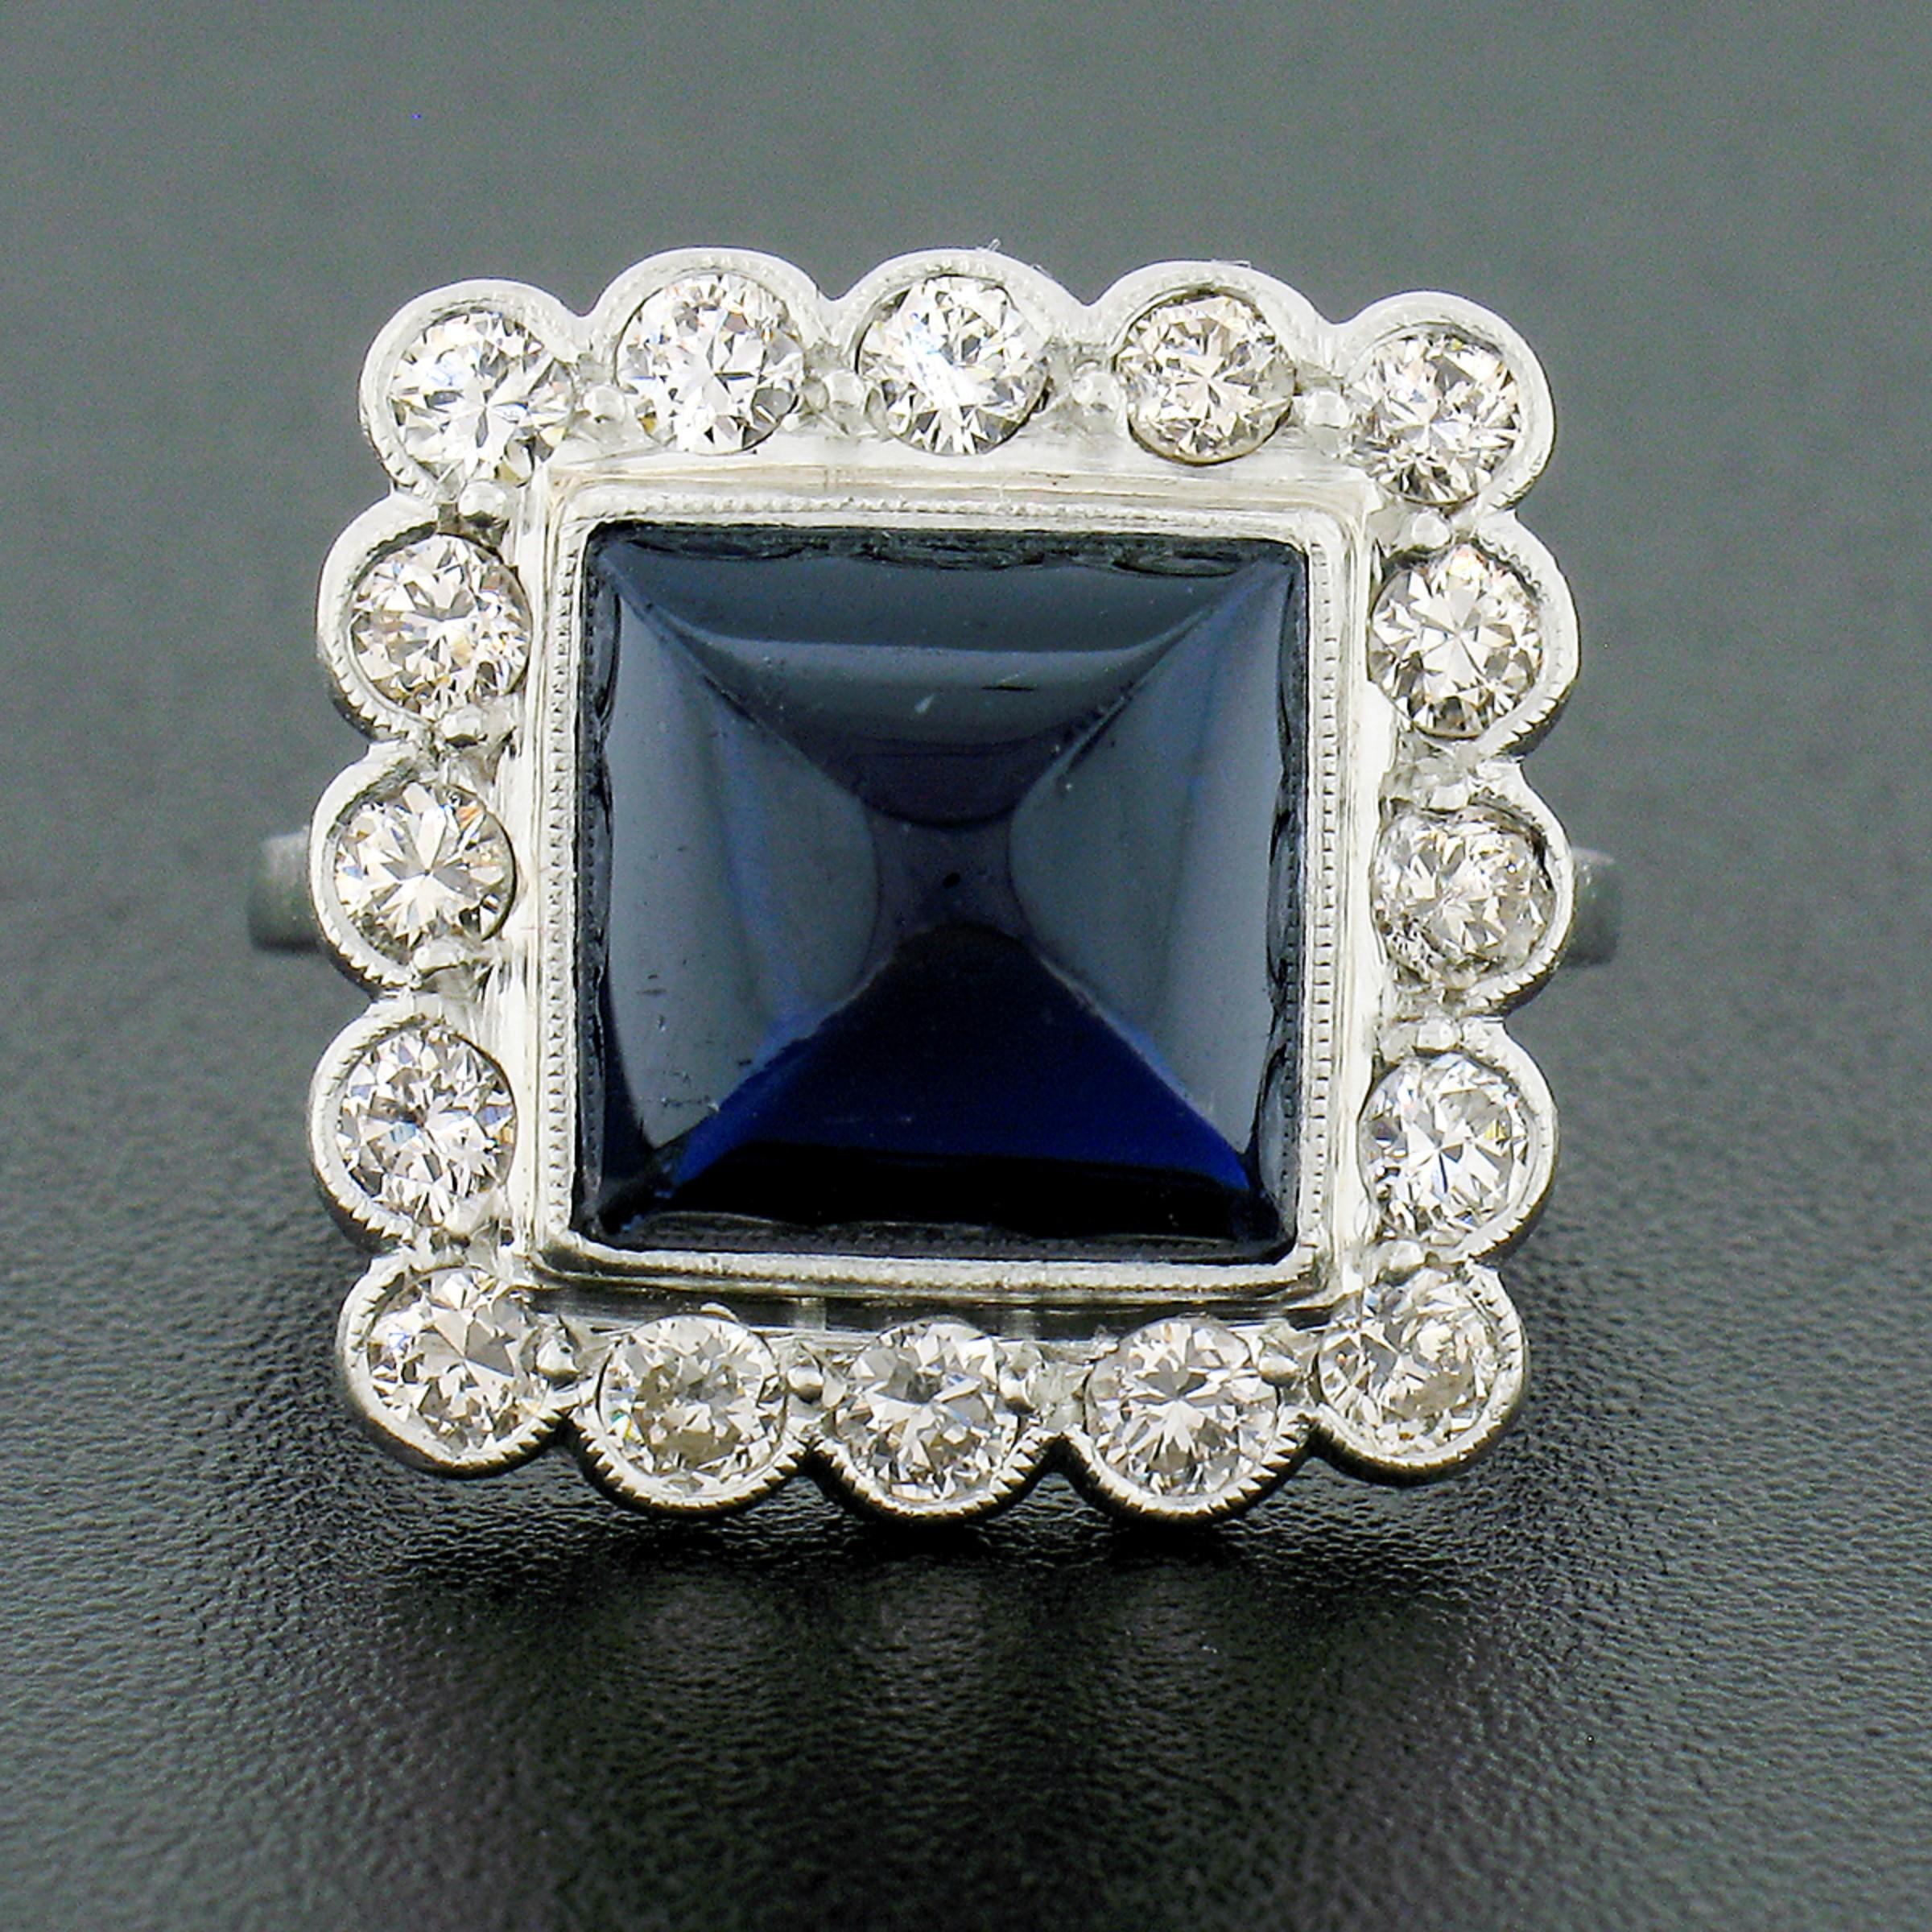 This gorgeous vintage sapphire and diamond ring was crafted in Sweden from solid 18k white gold. It features a large square sugarloaf cut natural sapphire milgrain bezel set at its center. This approximately 6.63 carat, GIA certified, Australian